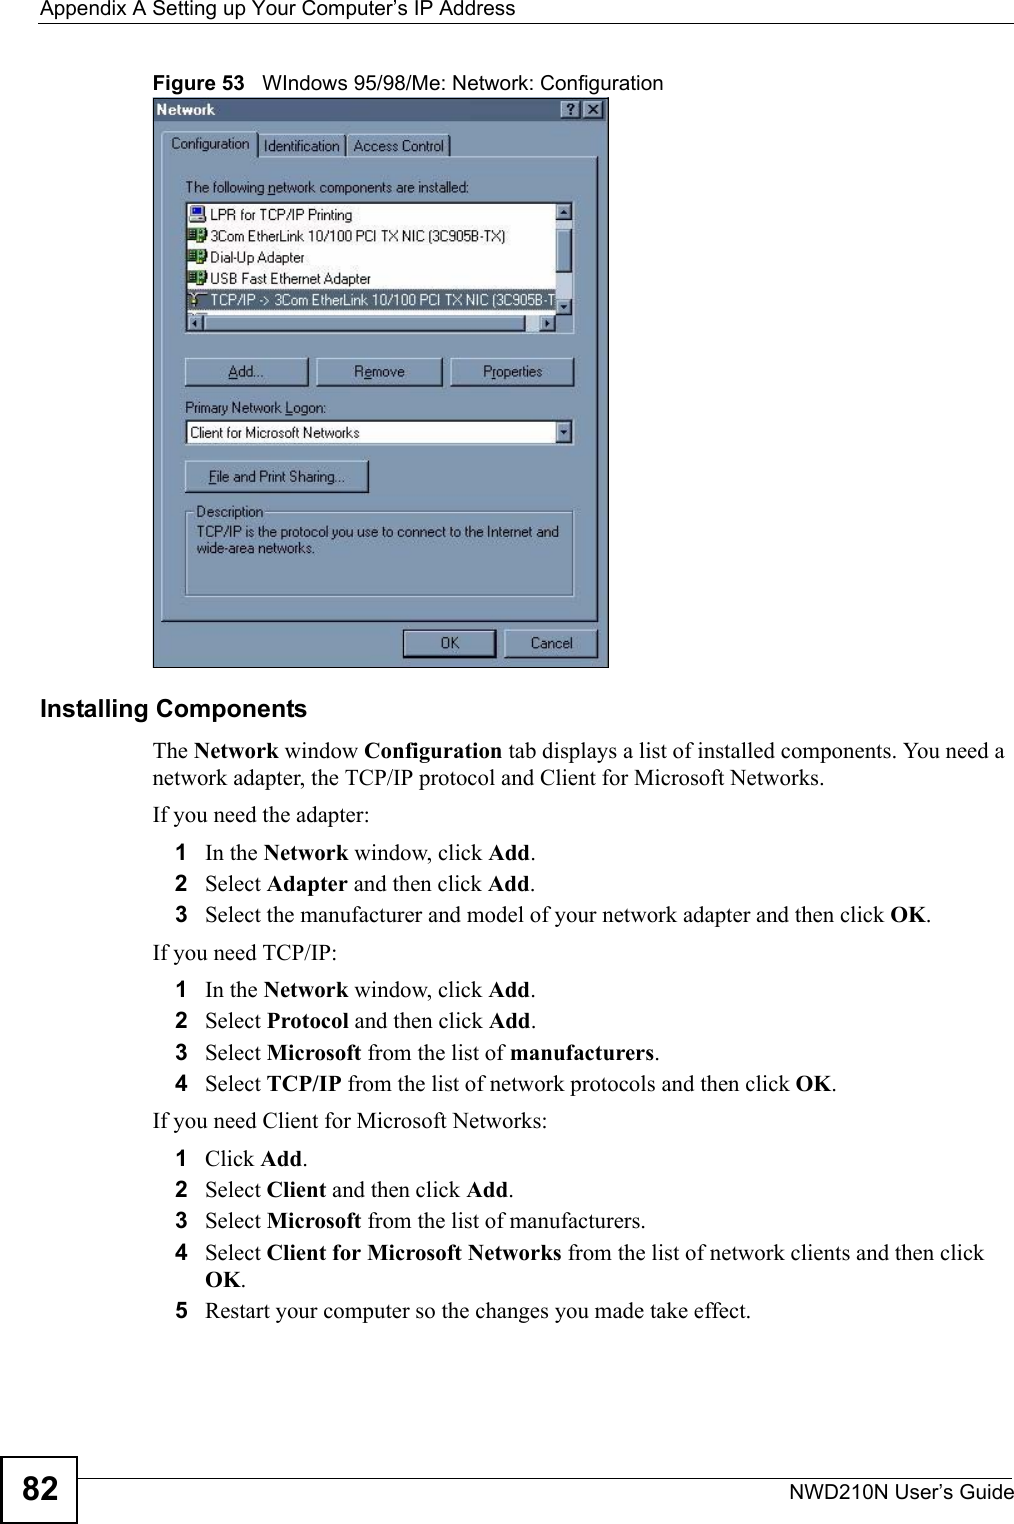 Appendix A Setting up Your Computer’s IP AddressNWD210N User’s Guide82Figure 53   WIndows 95/98/Me: Network: ConfigurationInstalling ComponentsThe Network window Configuration tab displays a list of installed components. You need a network adapter, the TCP/IP protocol and Client for Microsoft Networks.If you need the adapter:1In the Network window, click Add.2Select Adapter and then click Add.3Select the manufacturer and model of your network adapter and then click OK.If you need TCP/IP:1In the Network window, click Add.2Select Protocol and then click Add.3Select Microsoft from the list of manufacturers.4Select TCP/IP from the list of network protocols and then click OK.If you need Client for Microsoft Networks:1Click Add.2Select Client and then click Add.3Select Microsoft from the list of manufacturers.4Select Client for Microsoft Networks from the list of network clients and then click OK.5Restart your computer so the changes you made take effect.